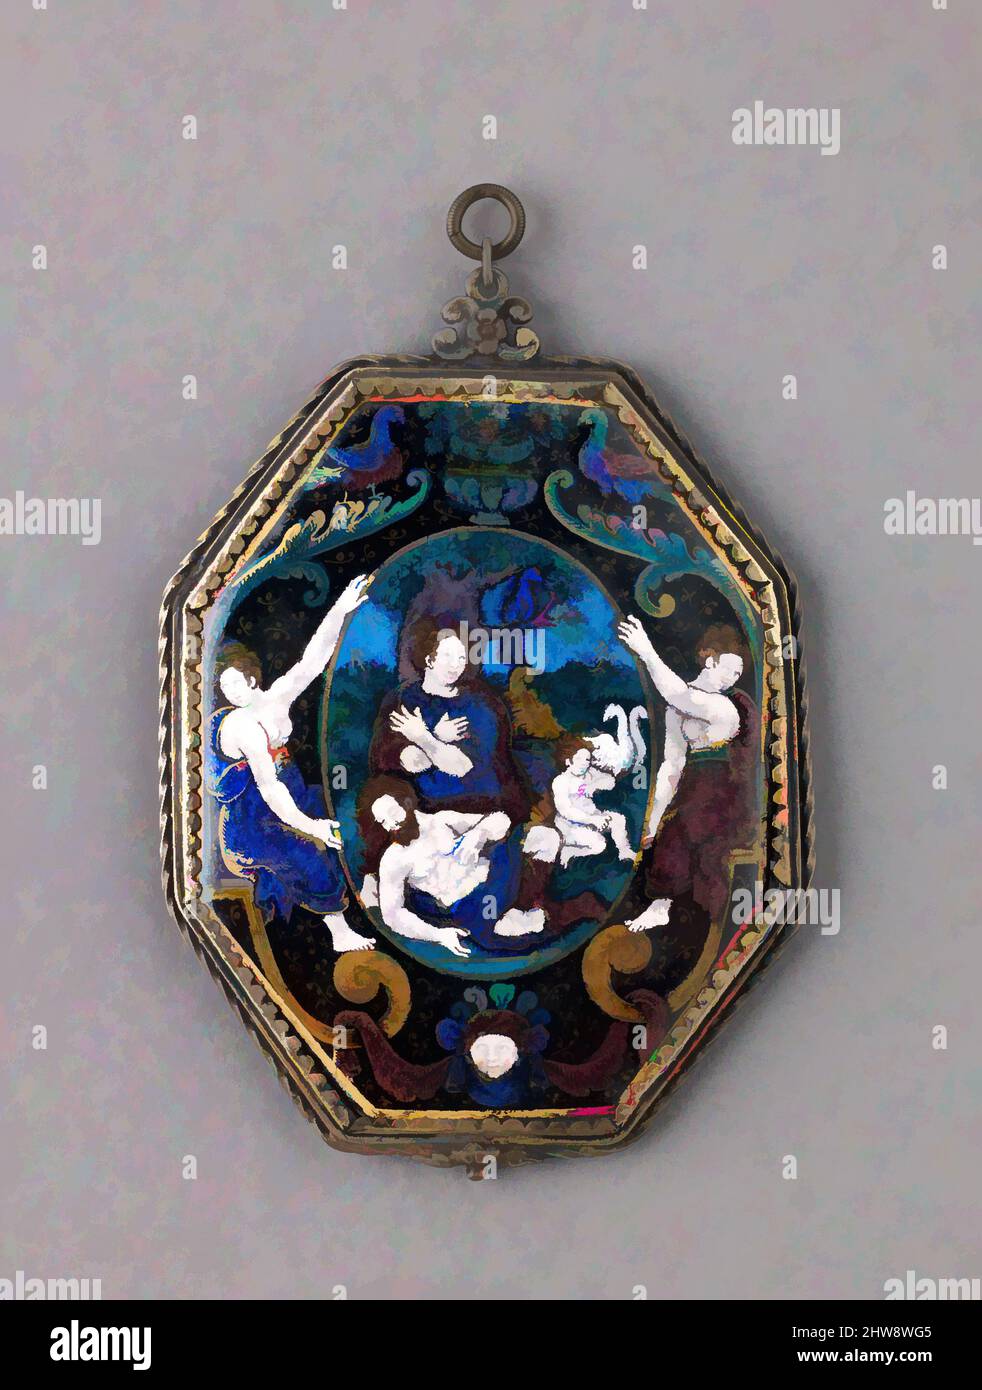 Art inspired by Mirror: Venus Mourning the Dead Adonis, early 17th century, Painted enamel, partly gilt and partly silvered, on copper; silver; glass., H. 11.5 cm, w. 8.1 cm, d. .9 cm., Enamels, Suzanne de Court (French, active 1575–1625, Classic works modernized by Artotop with a splash of modernity. Shapes, color and value, eye-catching visual impact on art. Emotions through freedom of artworks in a contemporary way. A timeless message pursuing a wildly creative new direction. Artists turning to the digital medium and creating the Artotop NFT Stock Photo